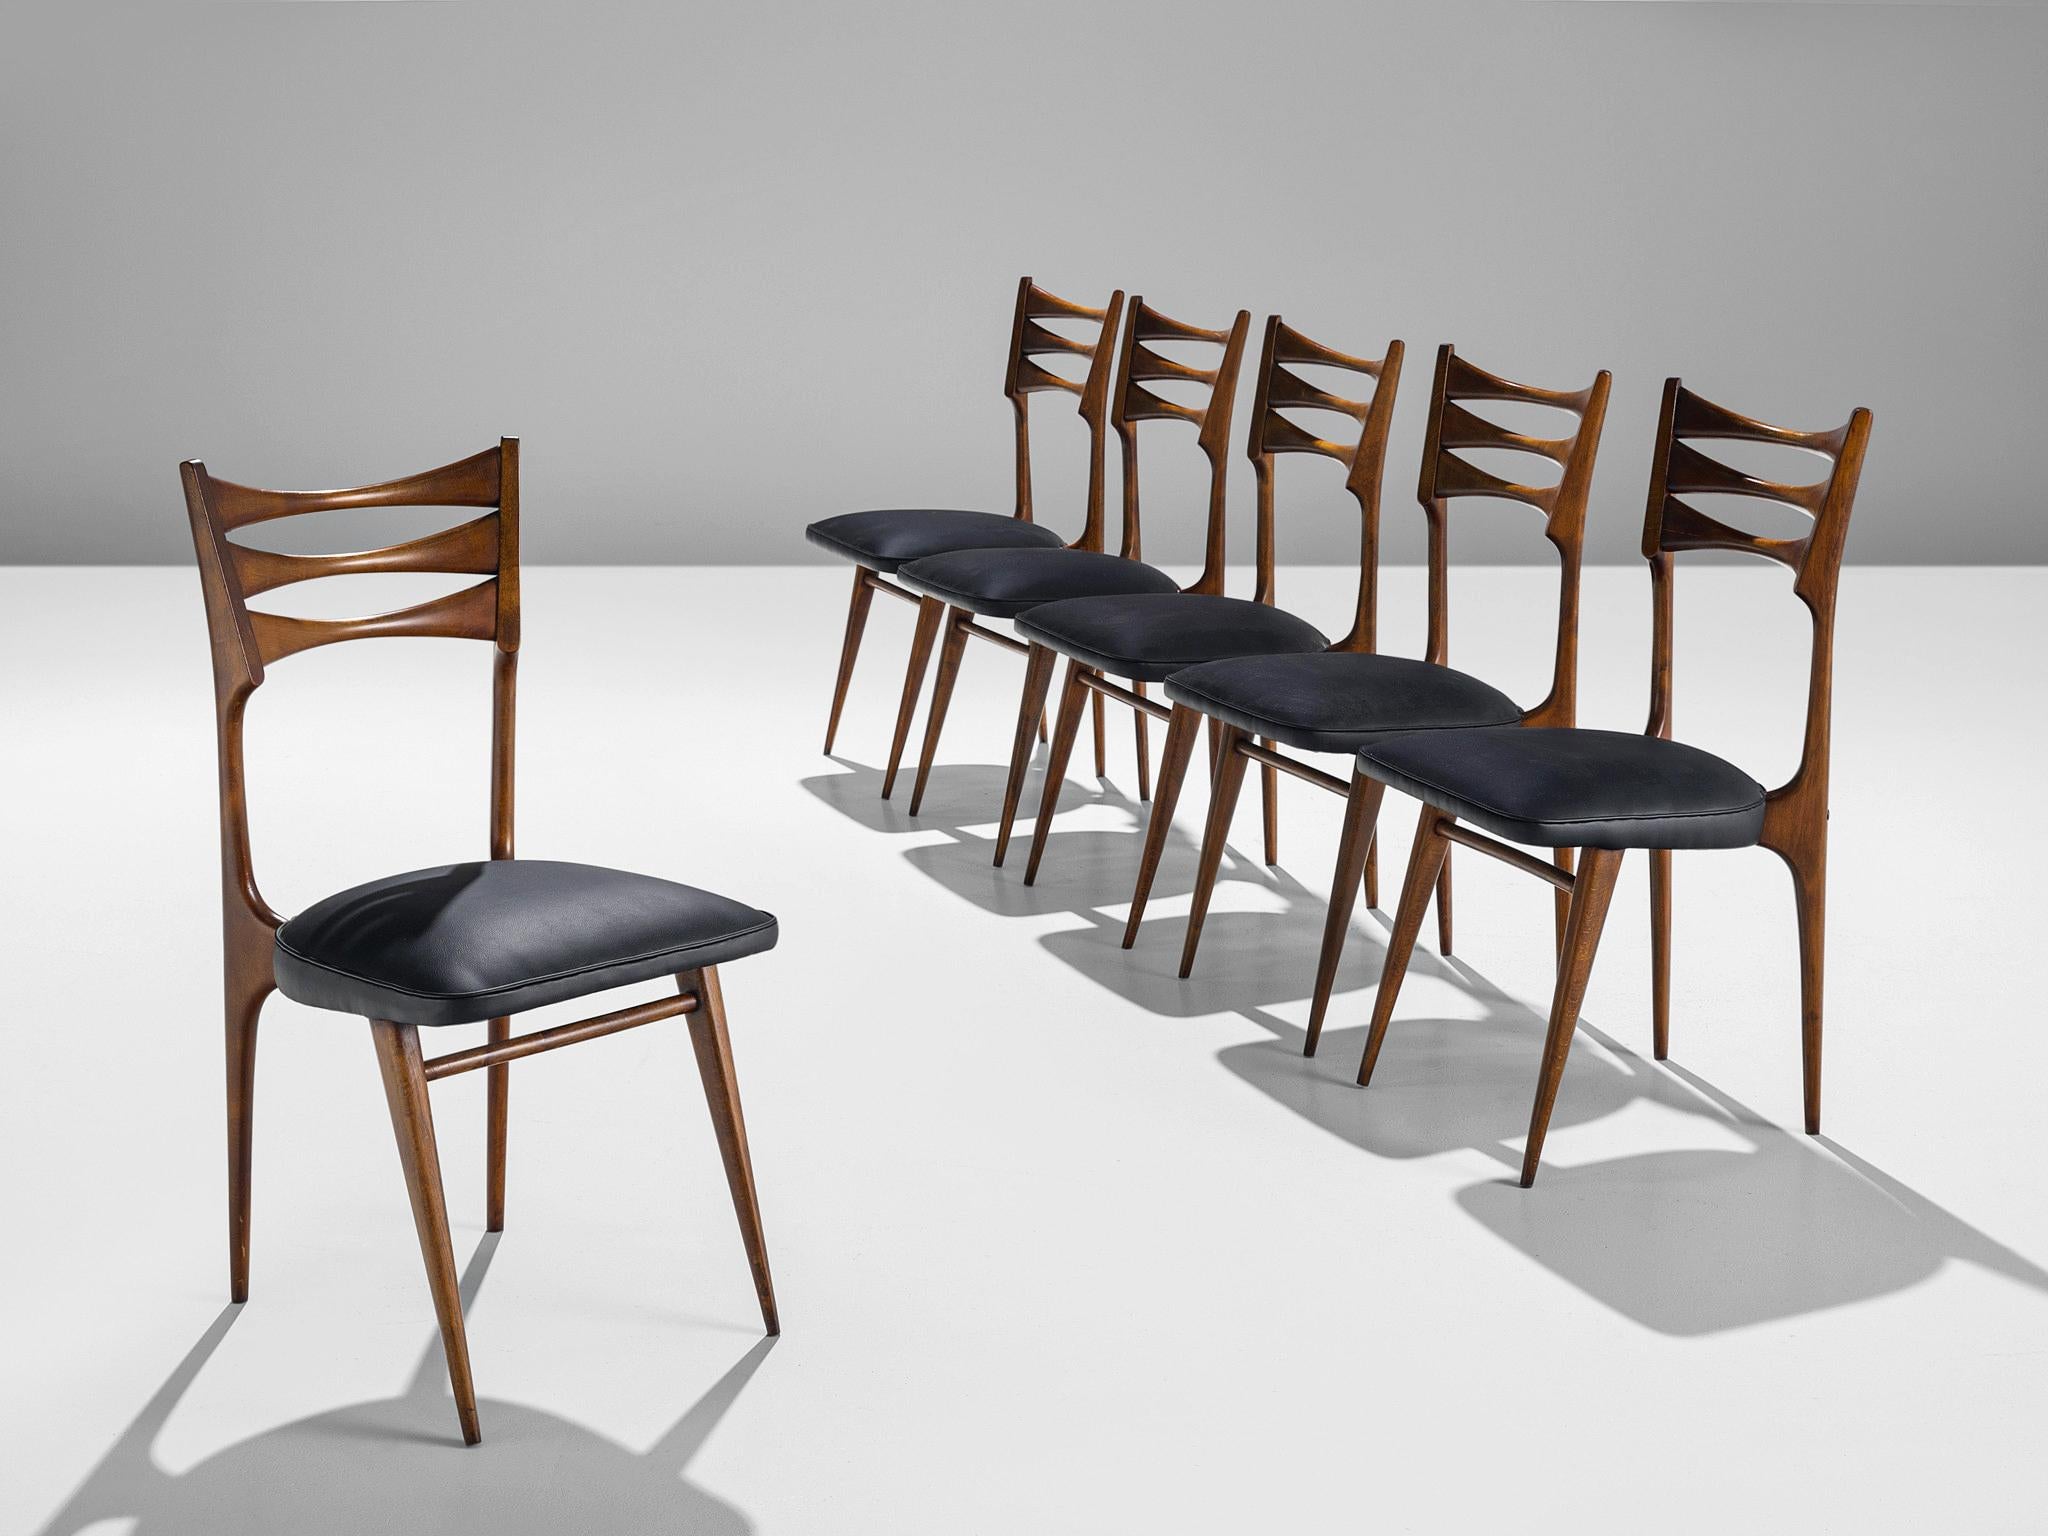 Set of six dining chairs, walnut, leatherette, 1960s, Italy.

This set of six elegant dining chairs is made in Italy in the 1960s. These pieces are sculptural, delicate, and well-constructed. The back shows an open frame with two oval cut outs, the